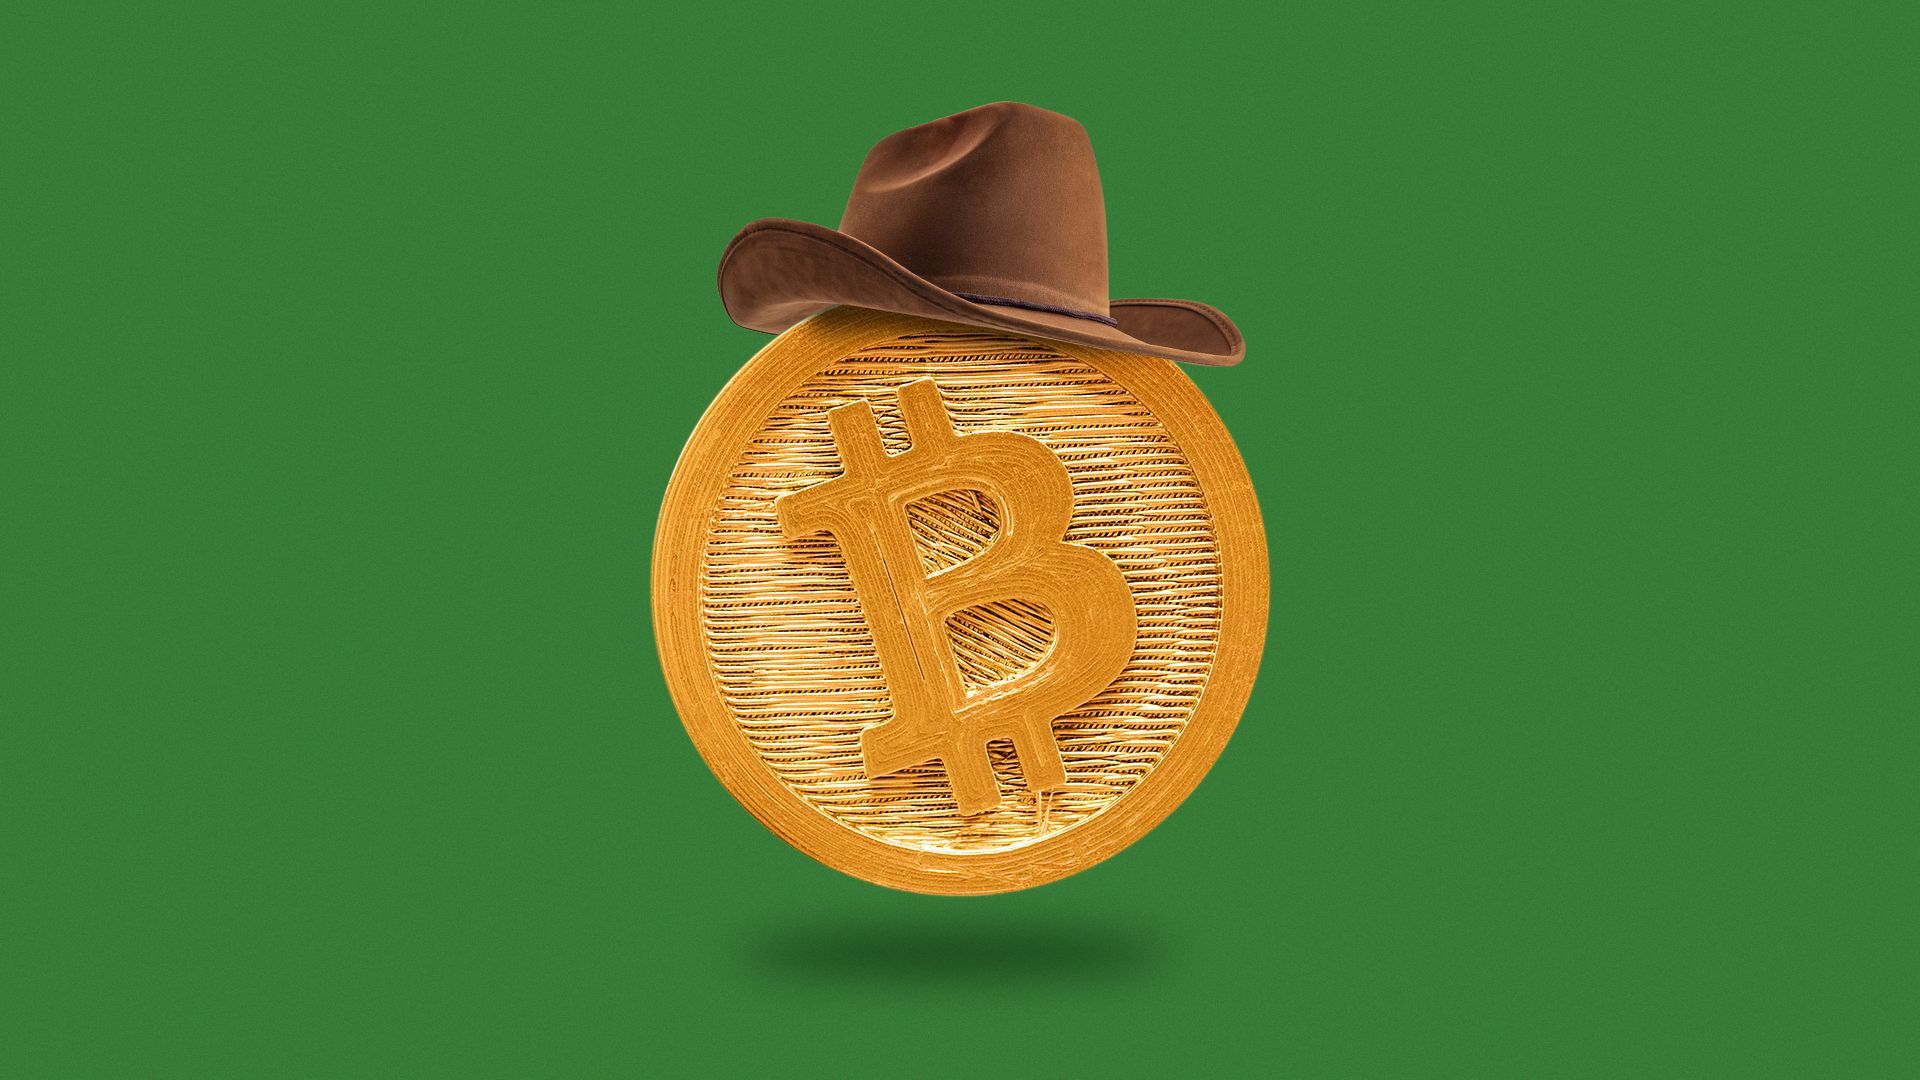 Illustration of a handmade Bitcoin wearing a cowboy hat.